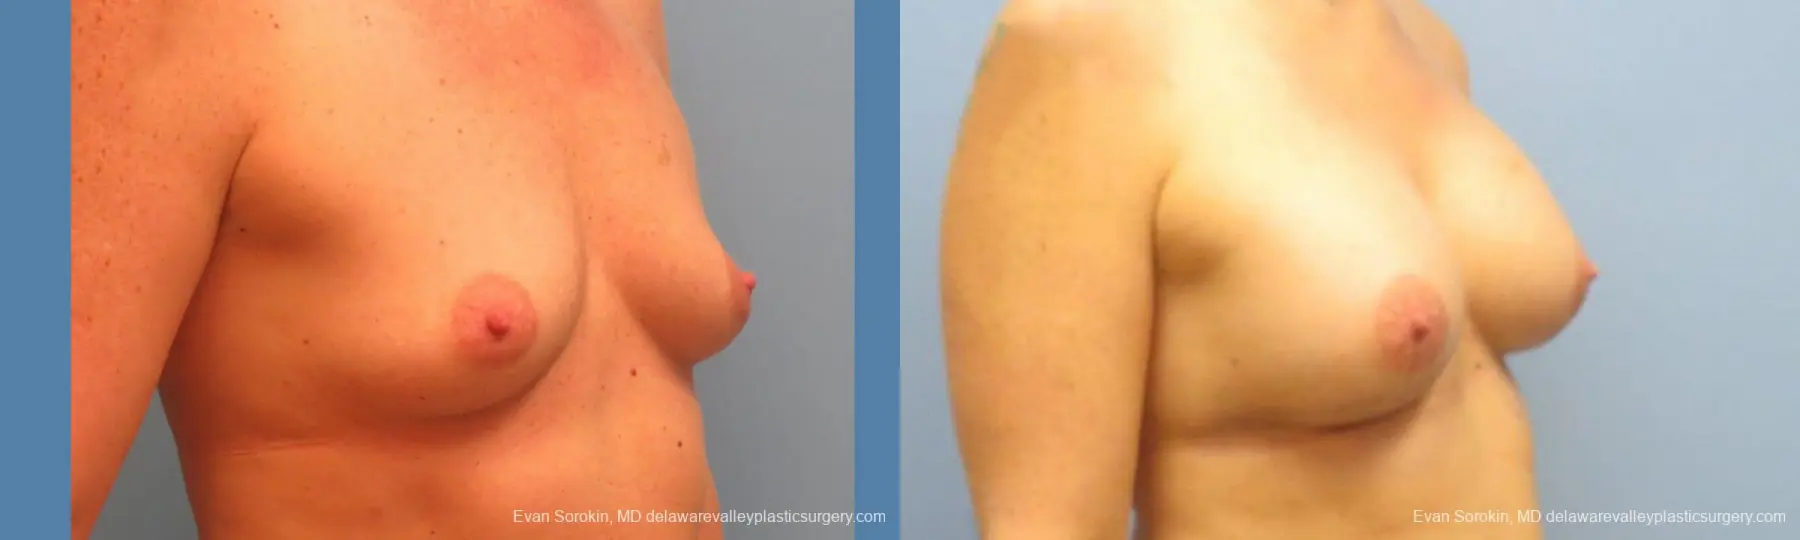 Philadelphia Breast Augmentation 9487 - Before and After 2